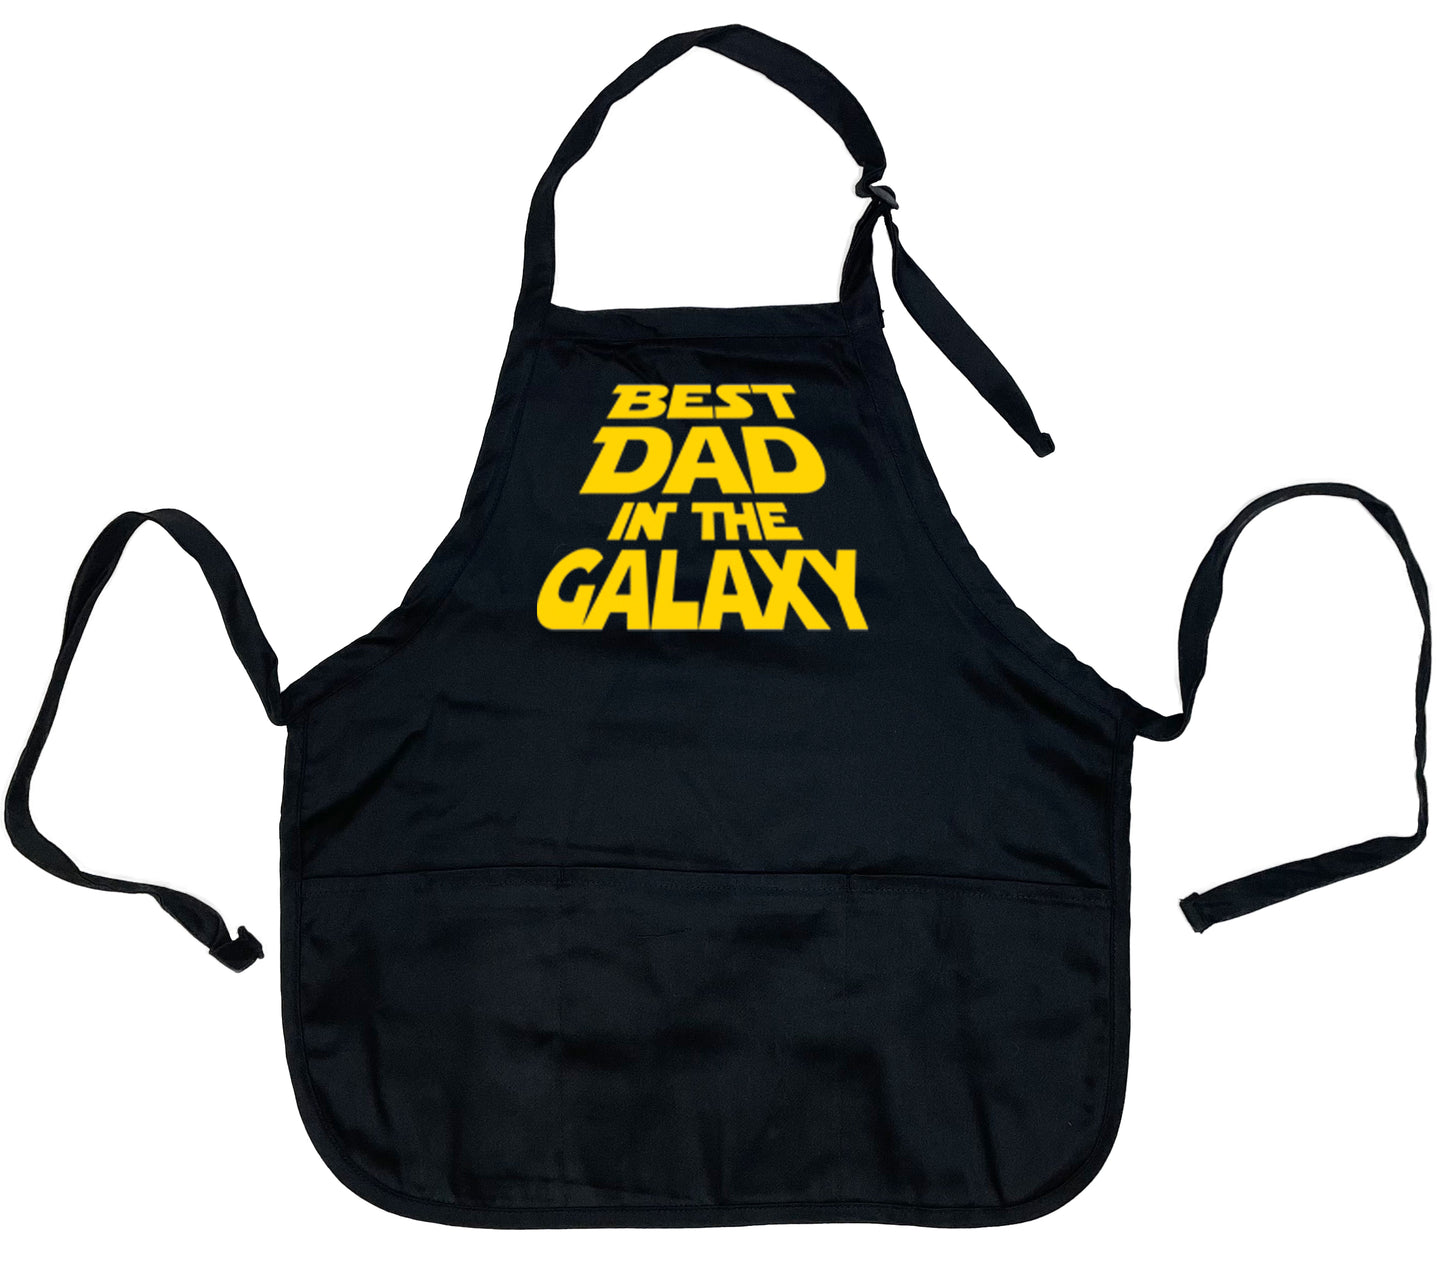 Best Dad In The Galaxy Apron - Funny T Shirts & Graphic Tees